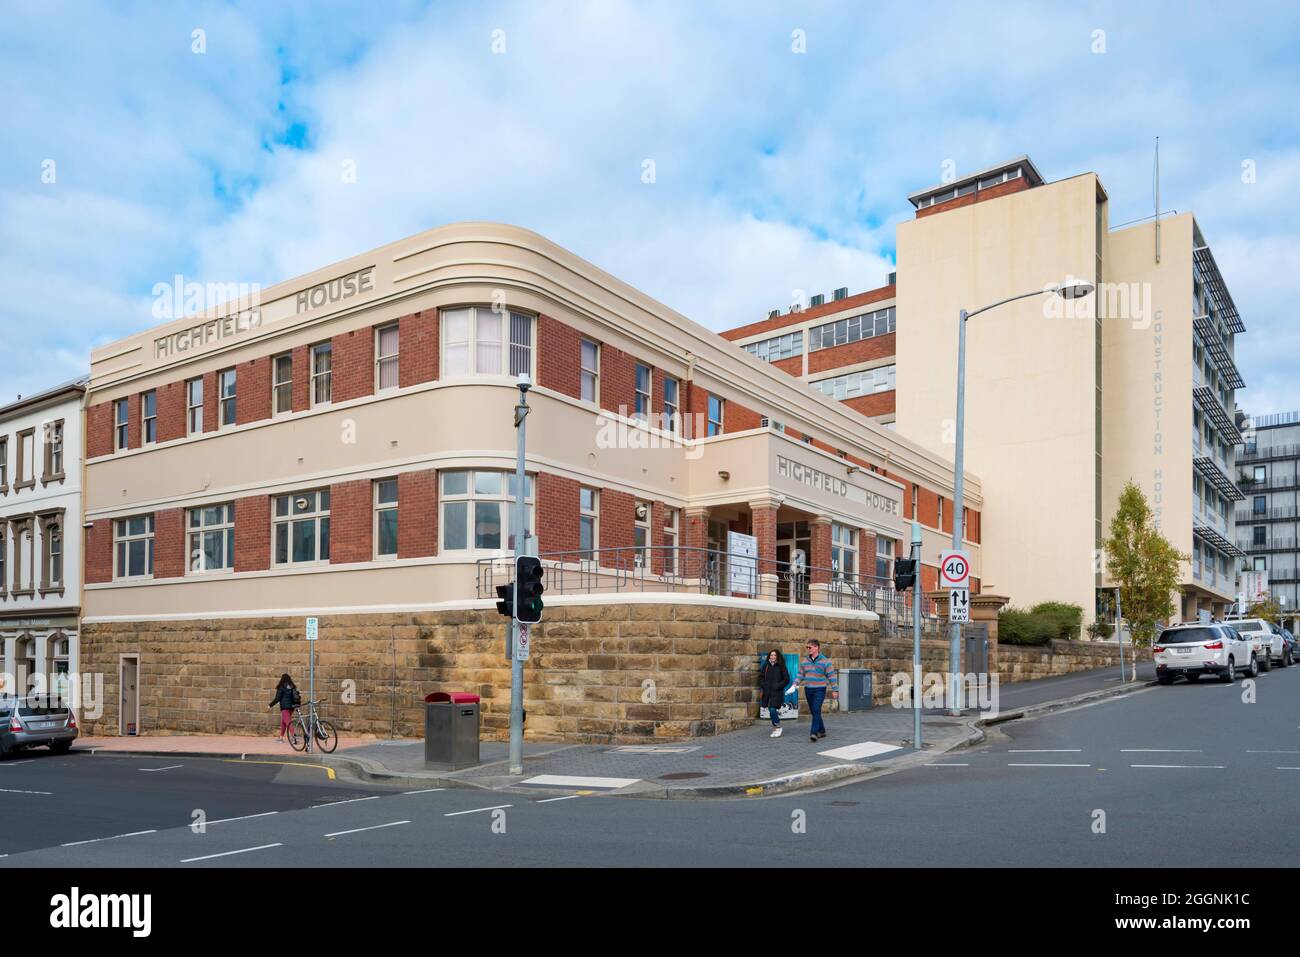 High-Field House in Hobart, Tasmania, Australia  is an Art Deco style building with horizontal render banding surrounding the corner building Stock Photo